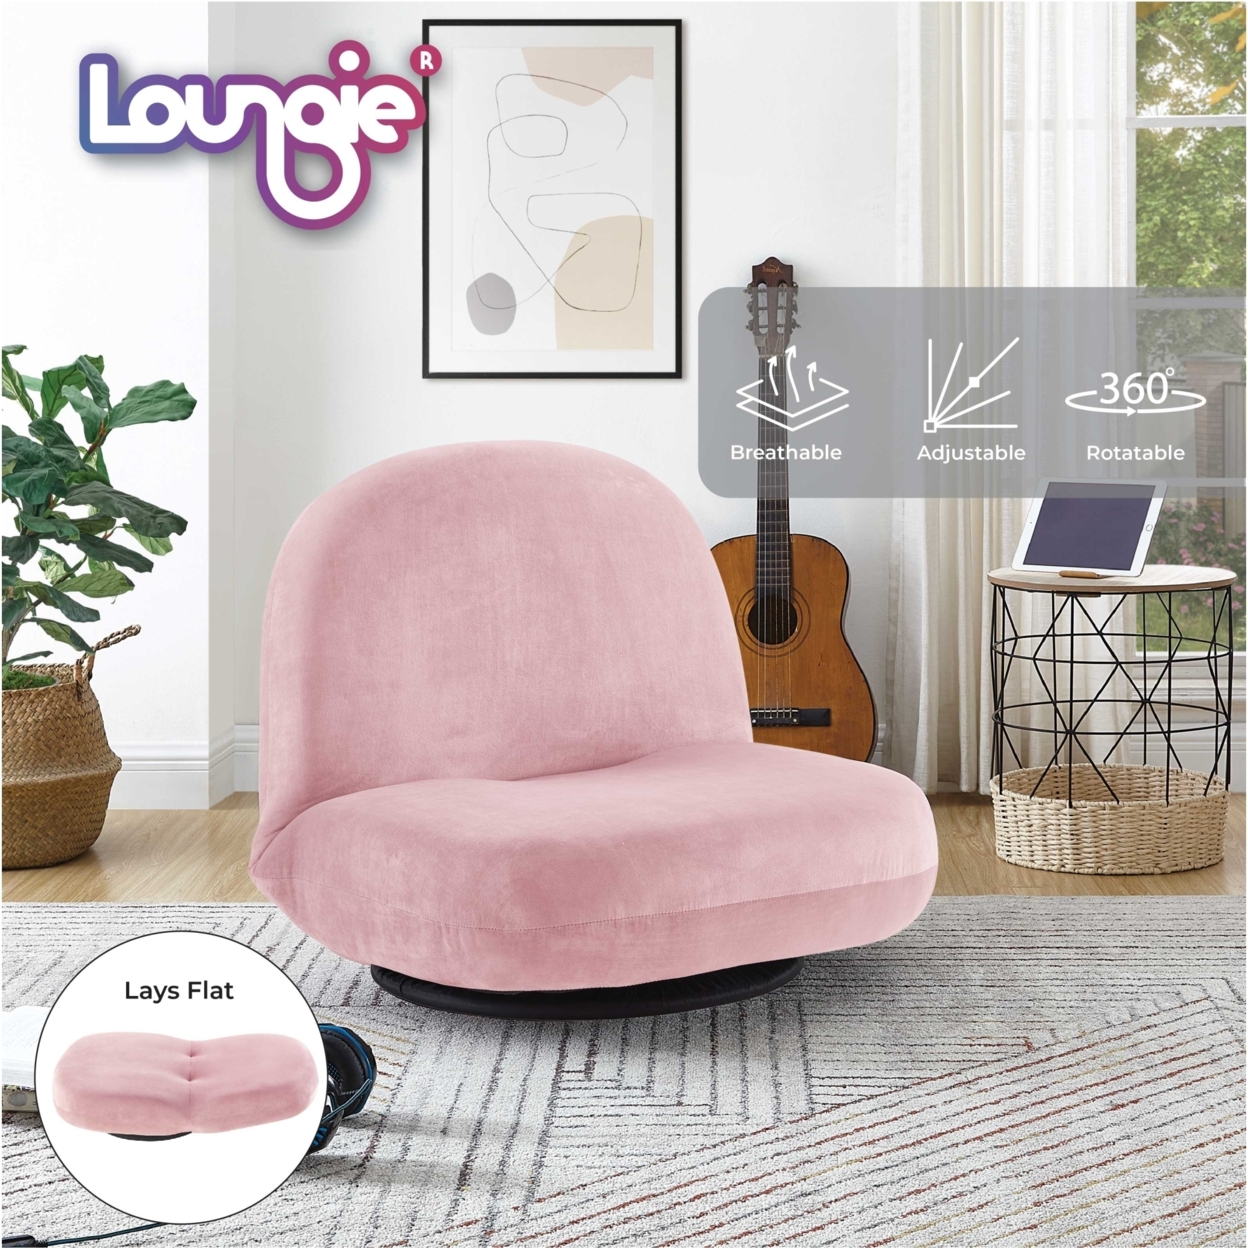 Mckenzi Chair - 5 Adjustable Positions, 360 Swivel, Reclines To Flat, Washable Cover, Steel Rod Construction - Pink